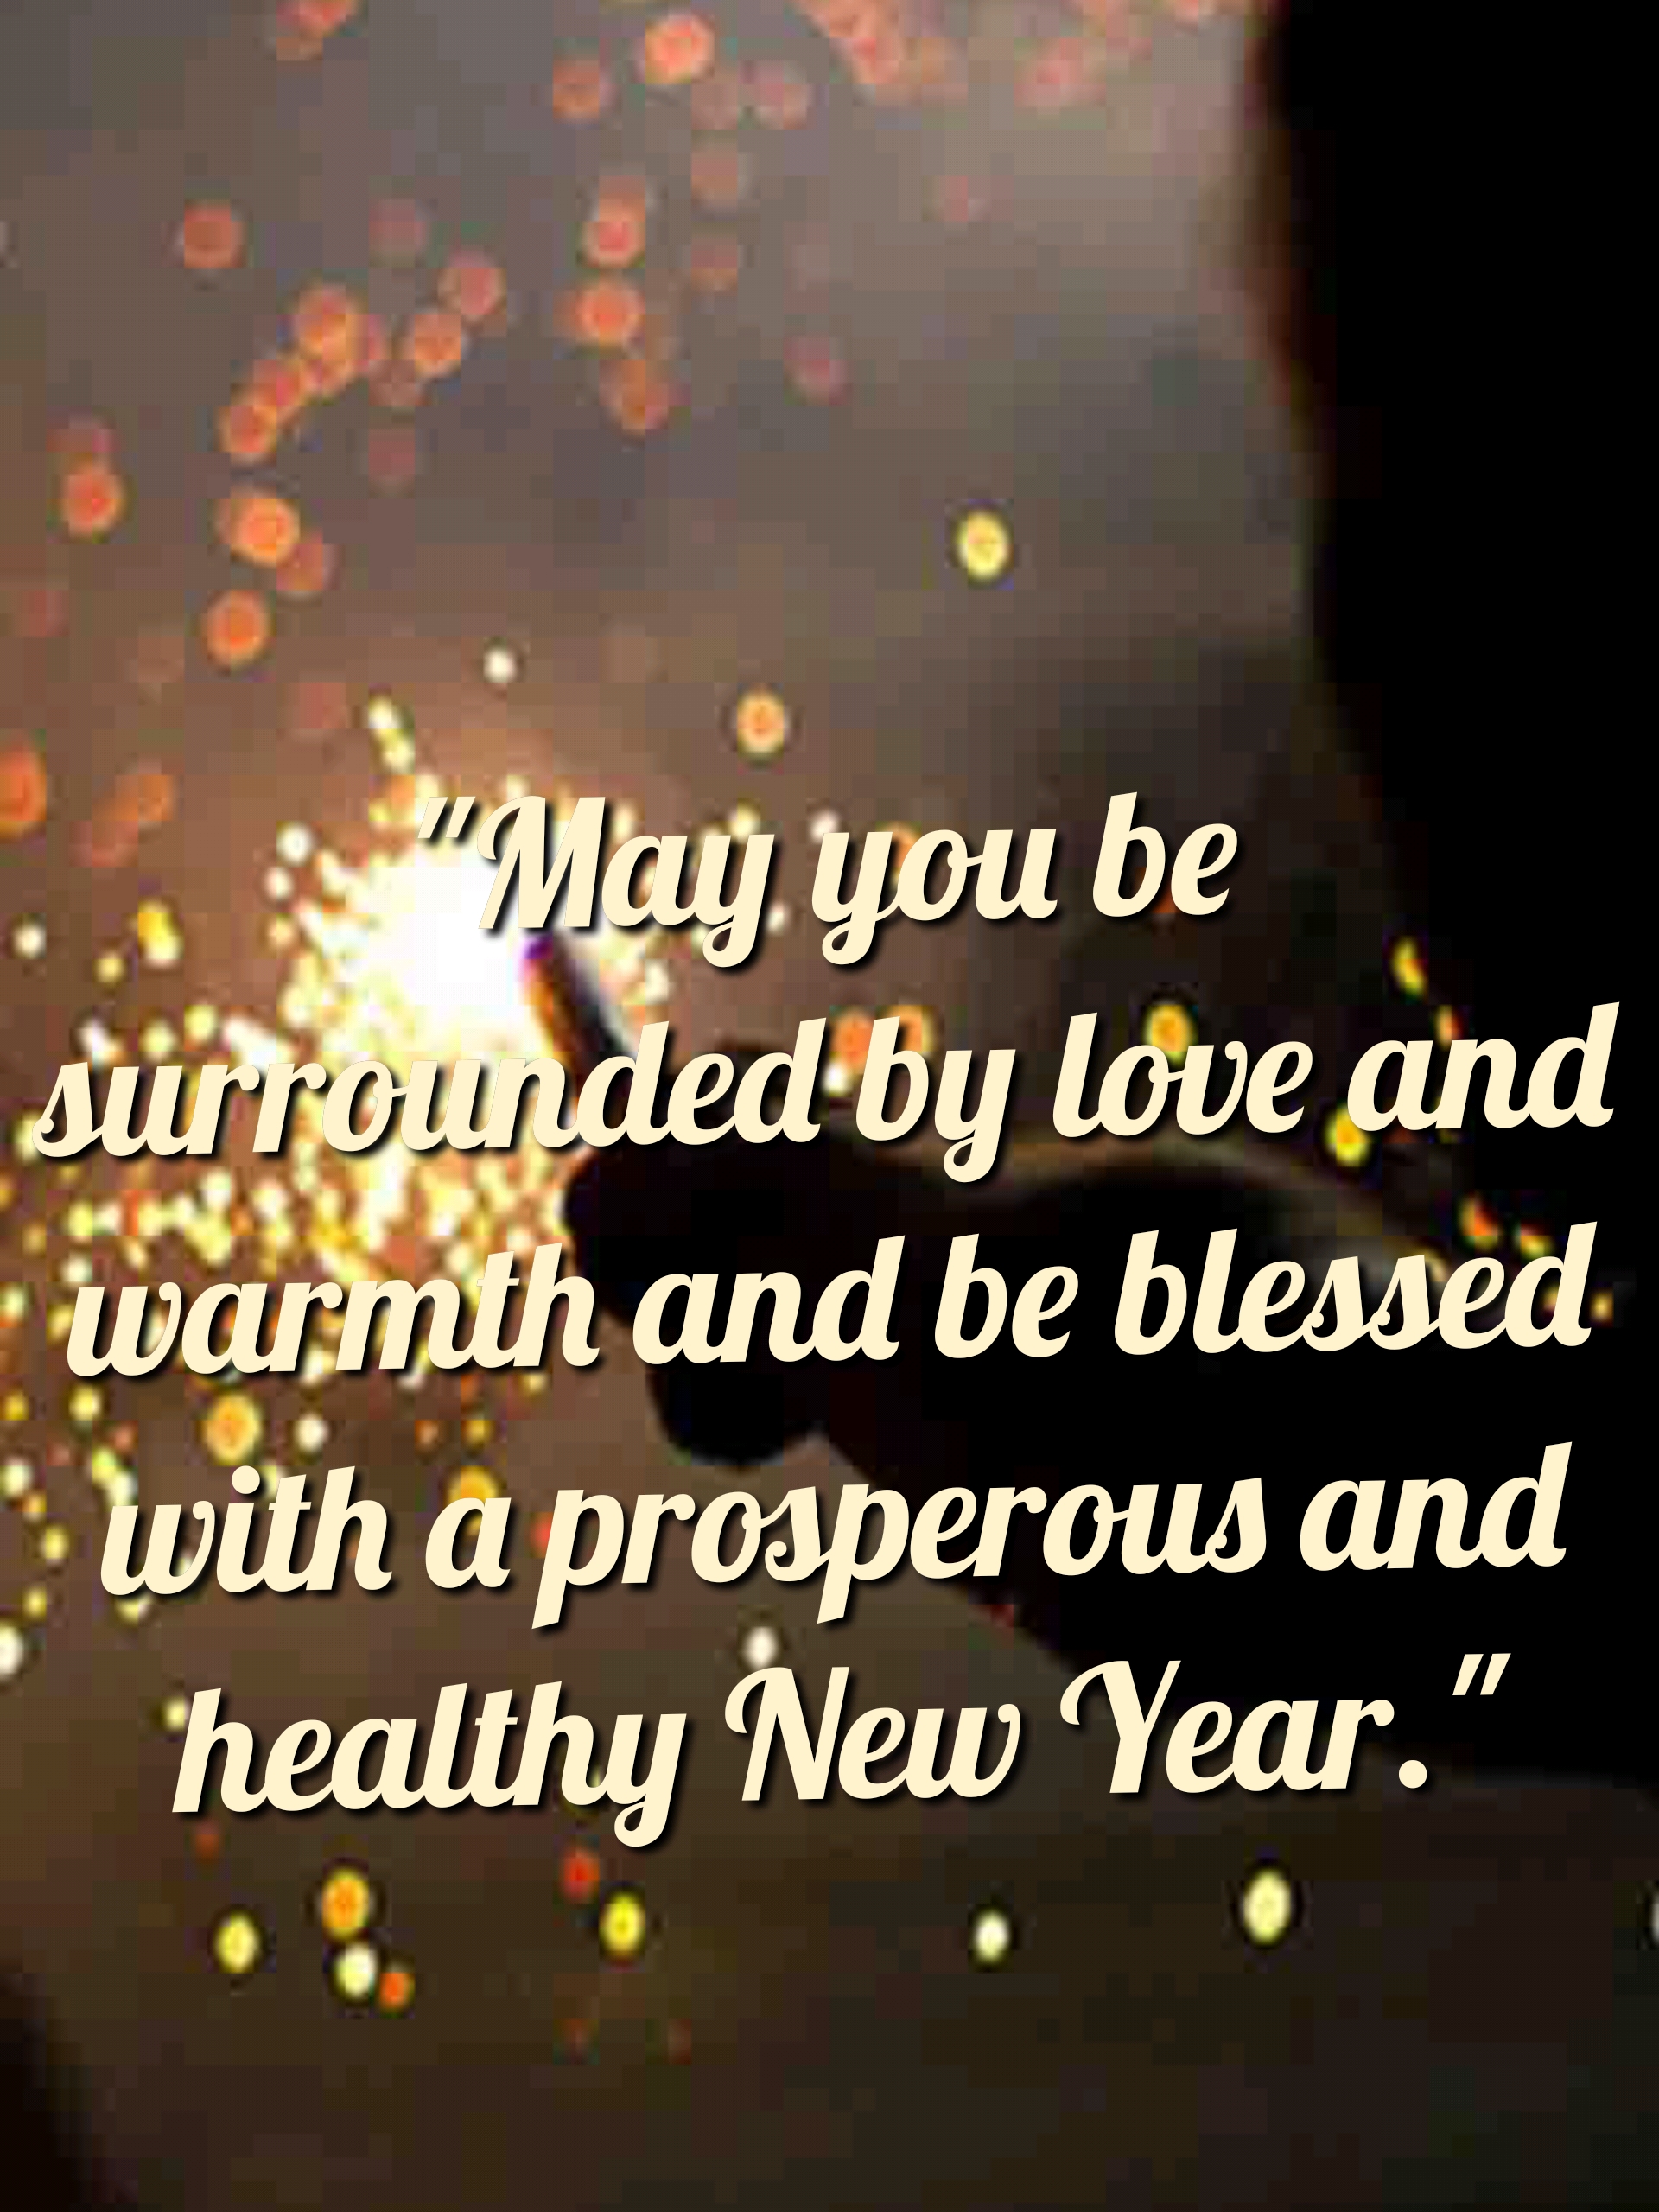 New Year blessing quotes